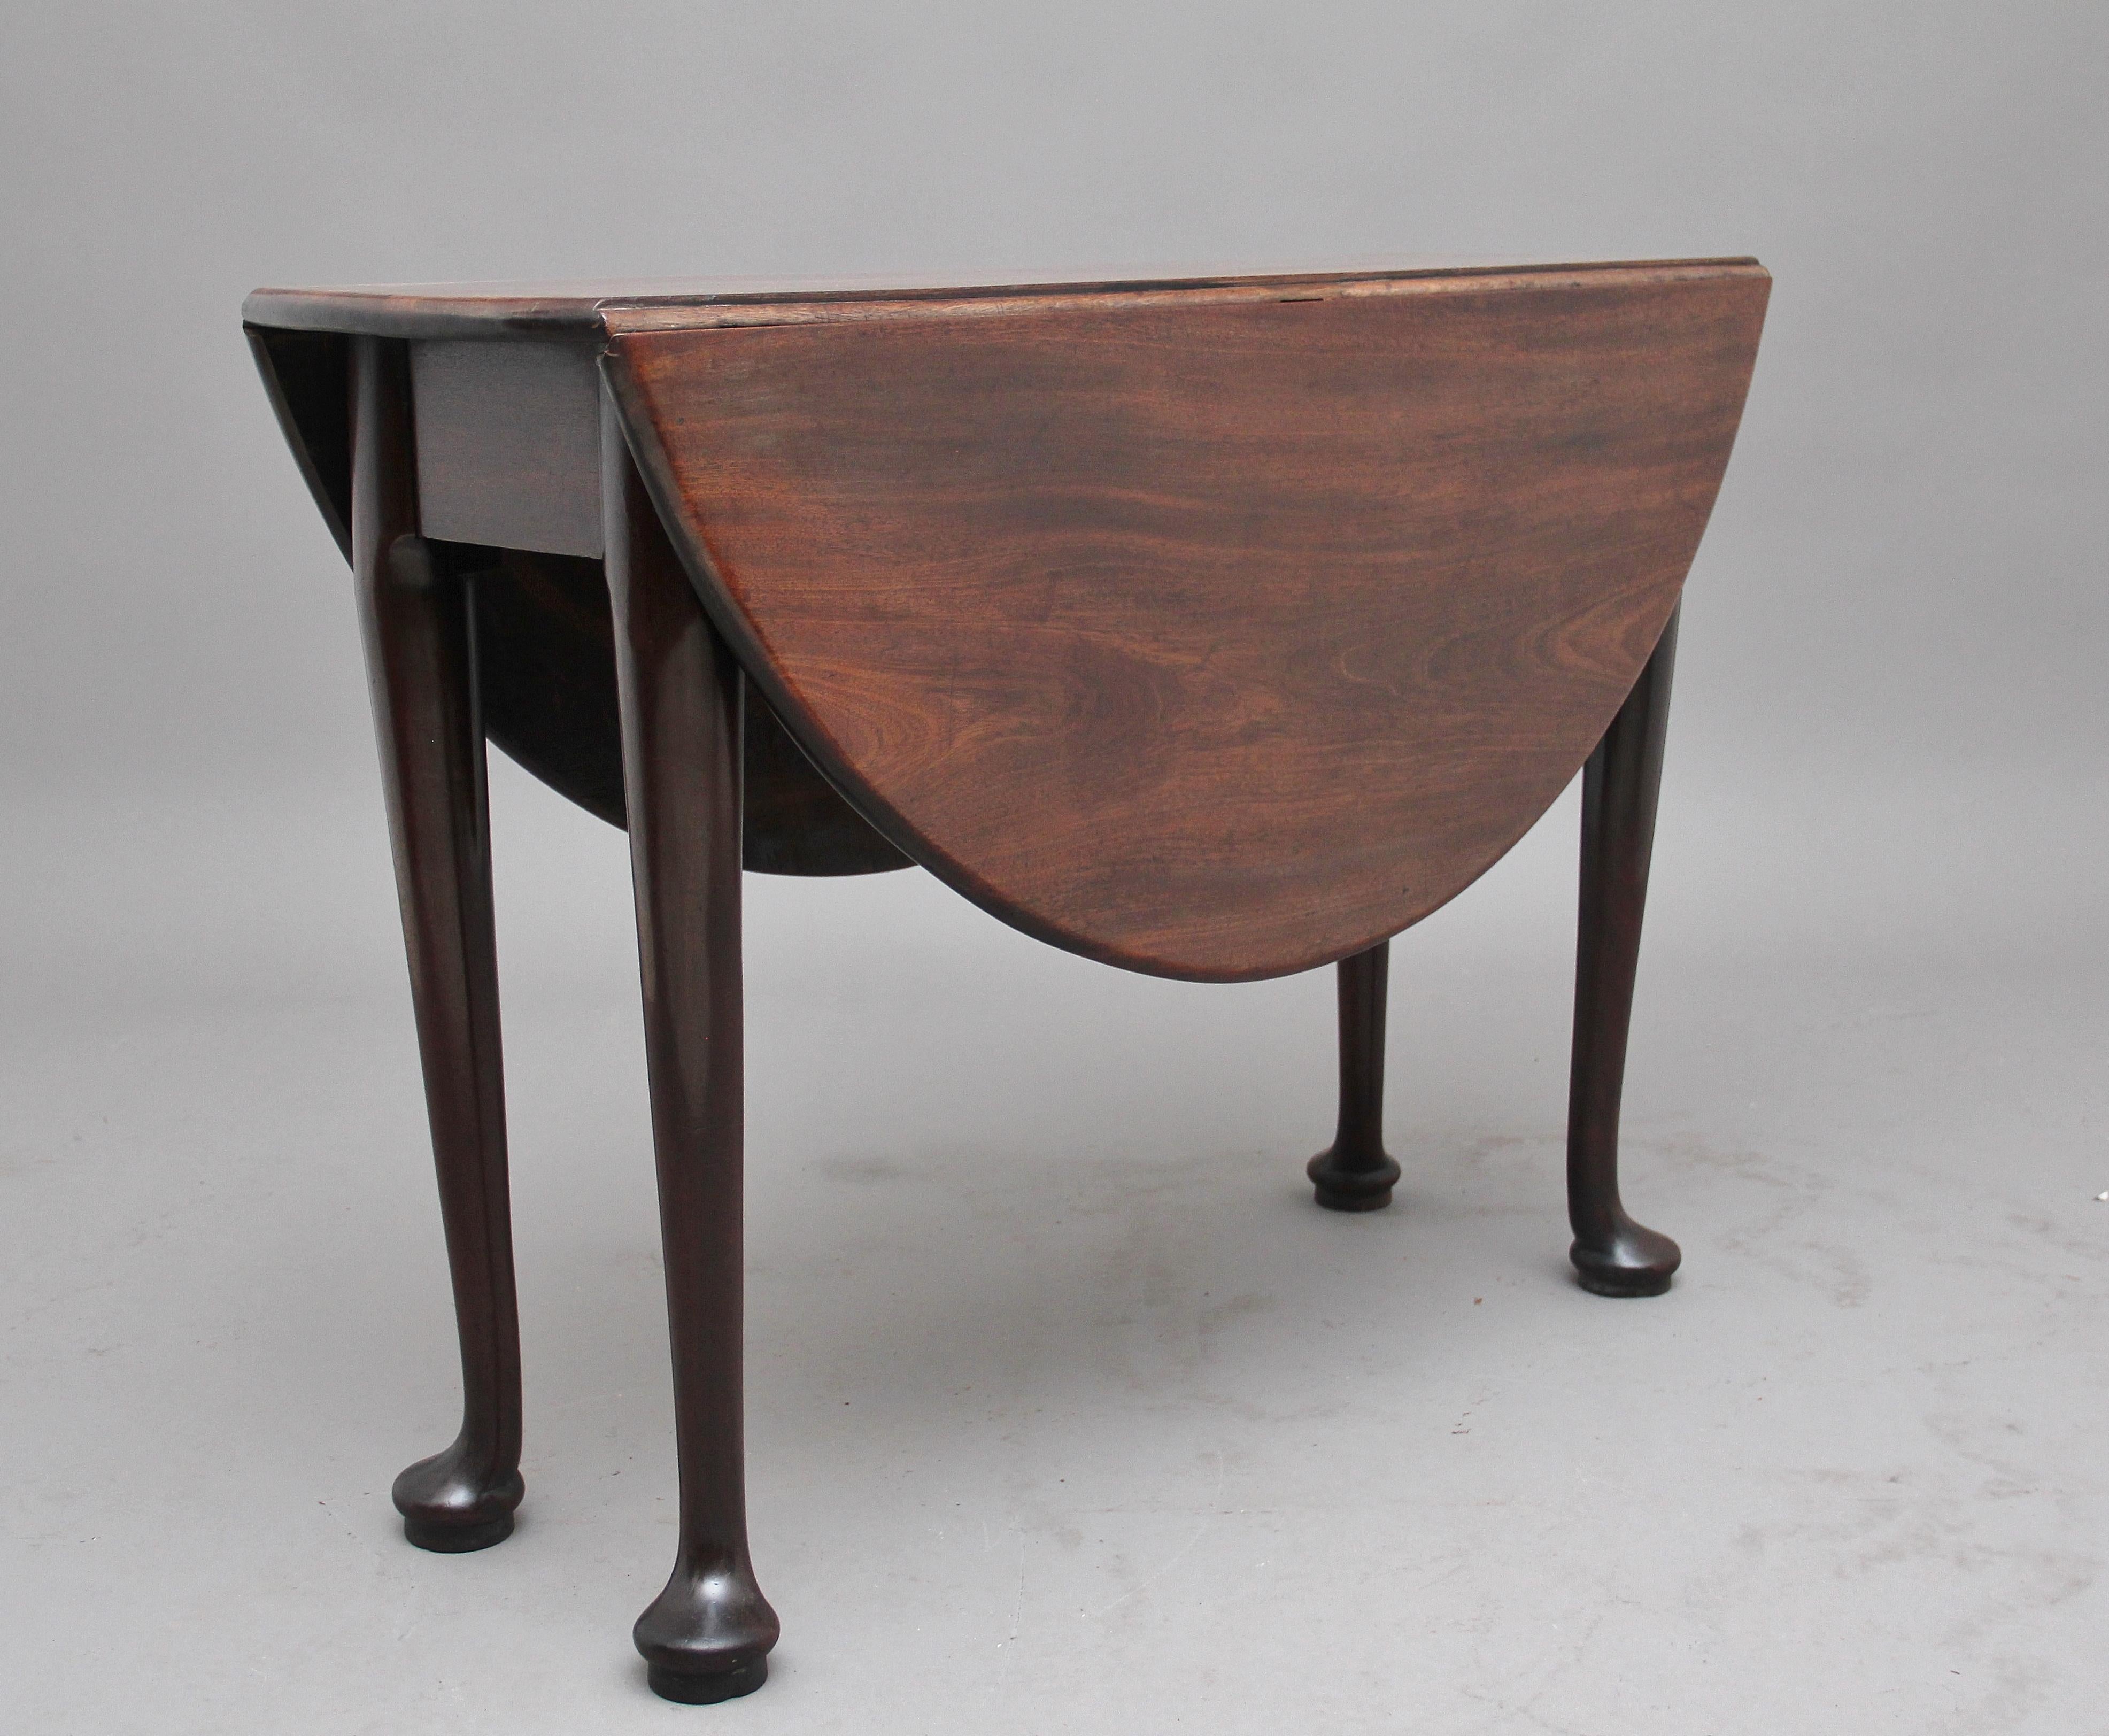 18th century Georgian mahogany drop-leaf table, having a lovely figured solid top, once the leaves are fully extended the top is oval in shape, standing on turned legs with pad feet, having a lovely warm rich mahogany color and in excellent